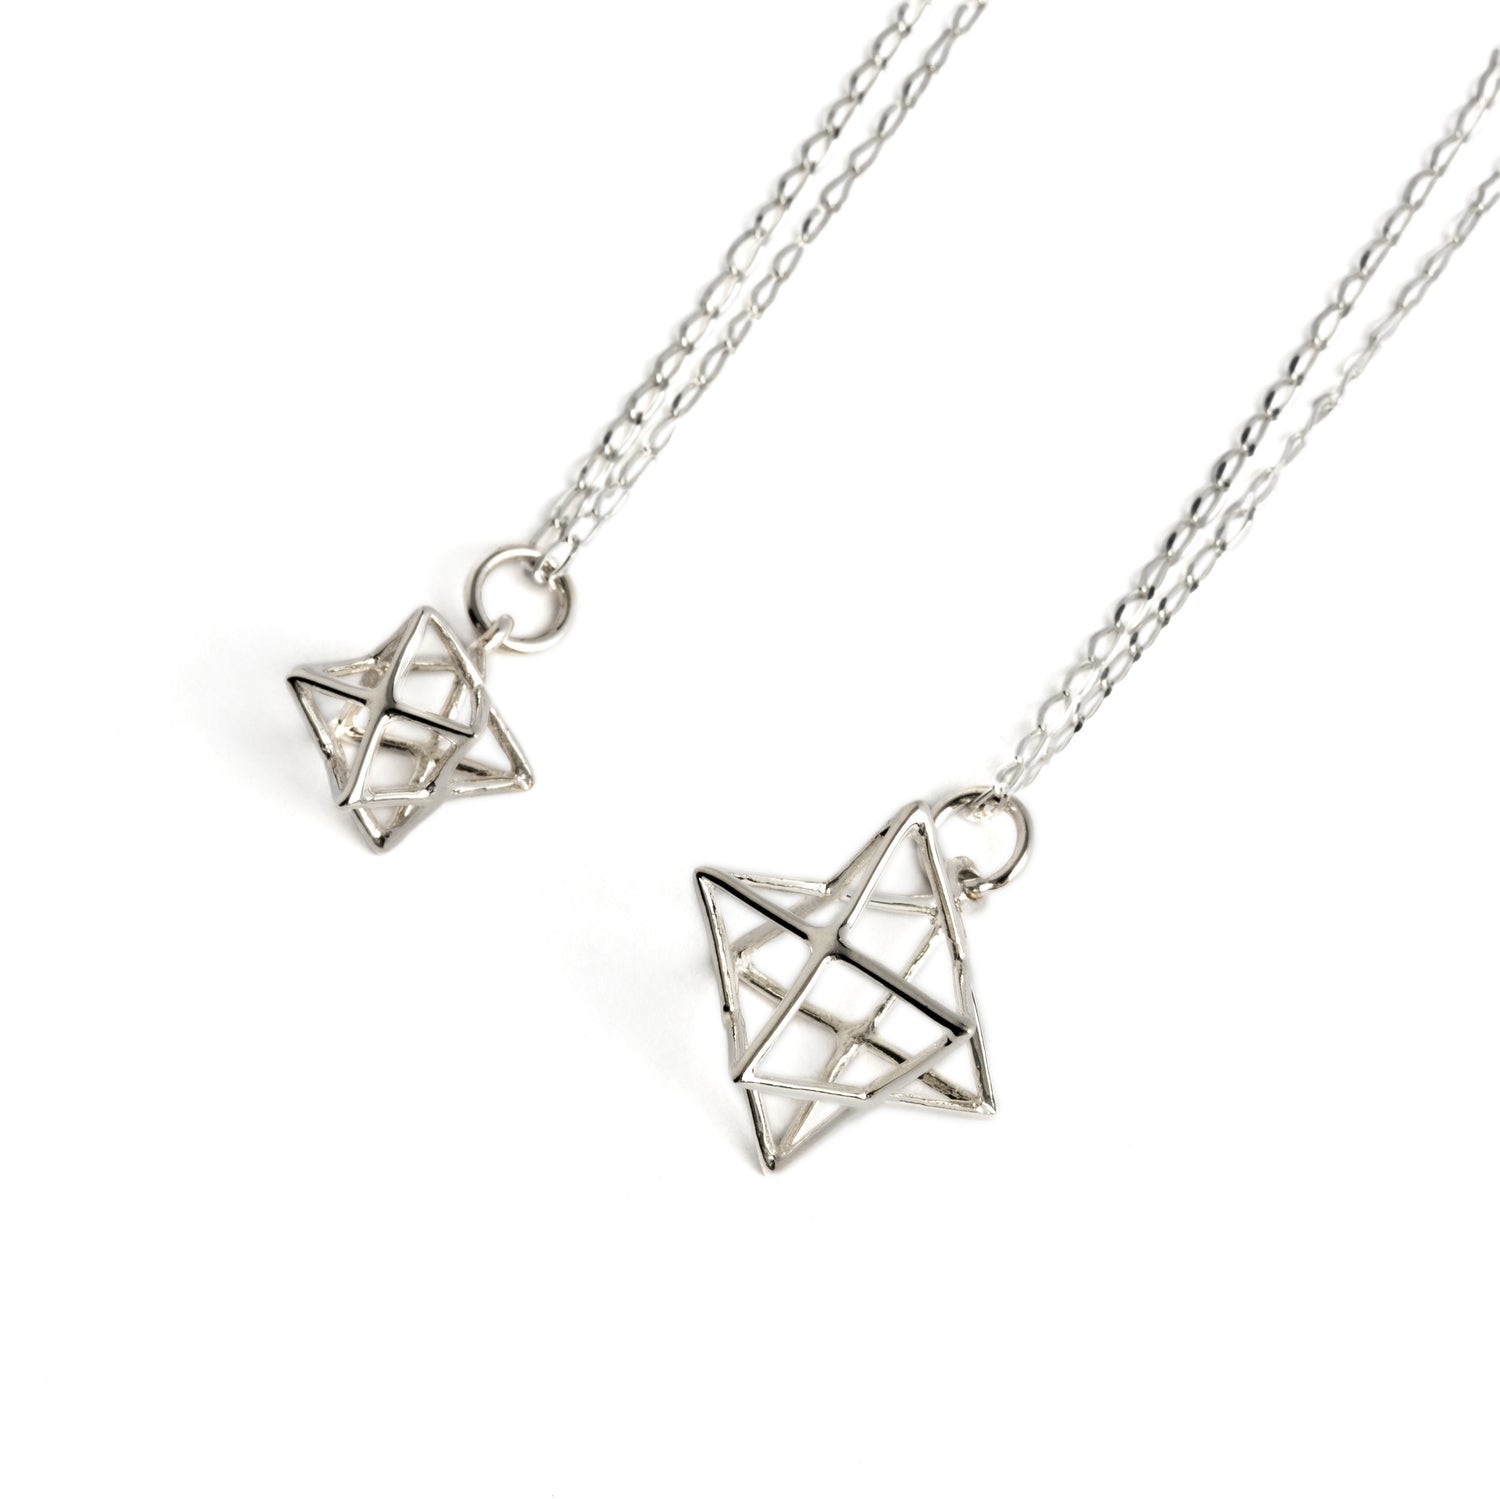 small and medium sizes Silver Wire Merkaba necklaces right side view